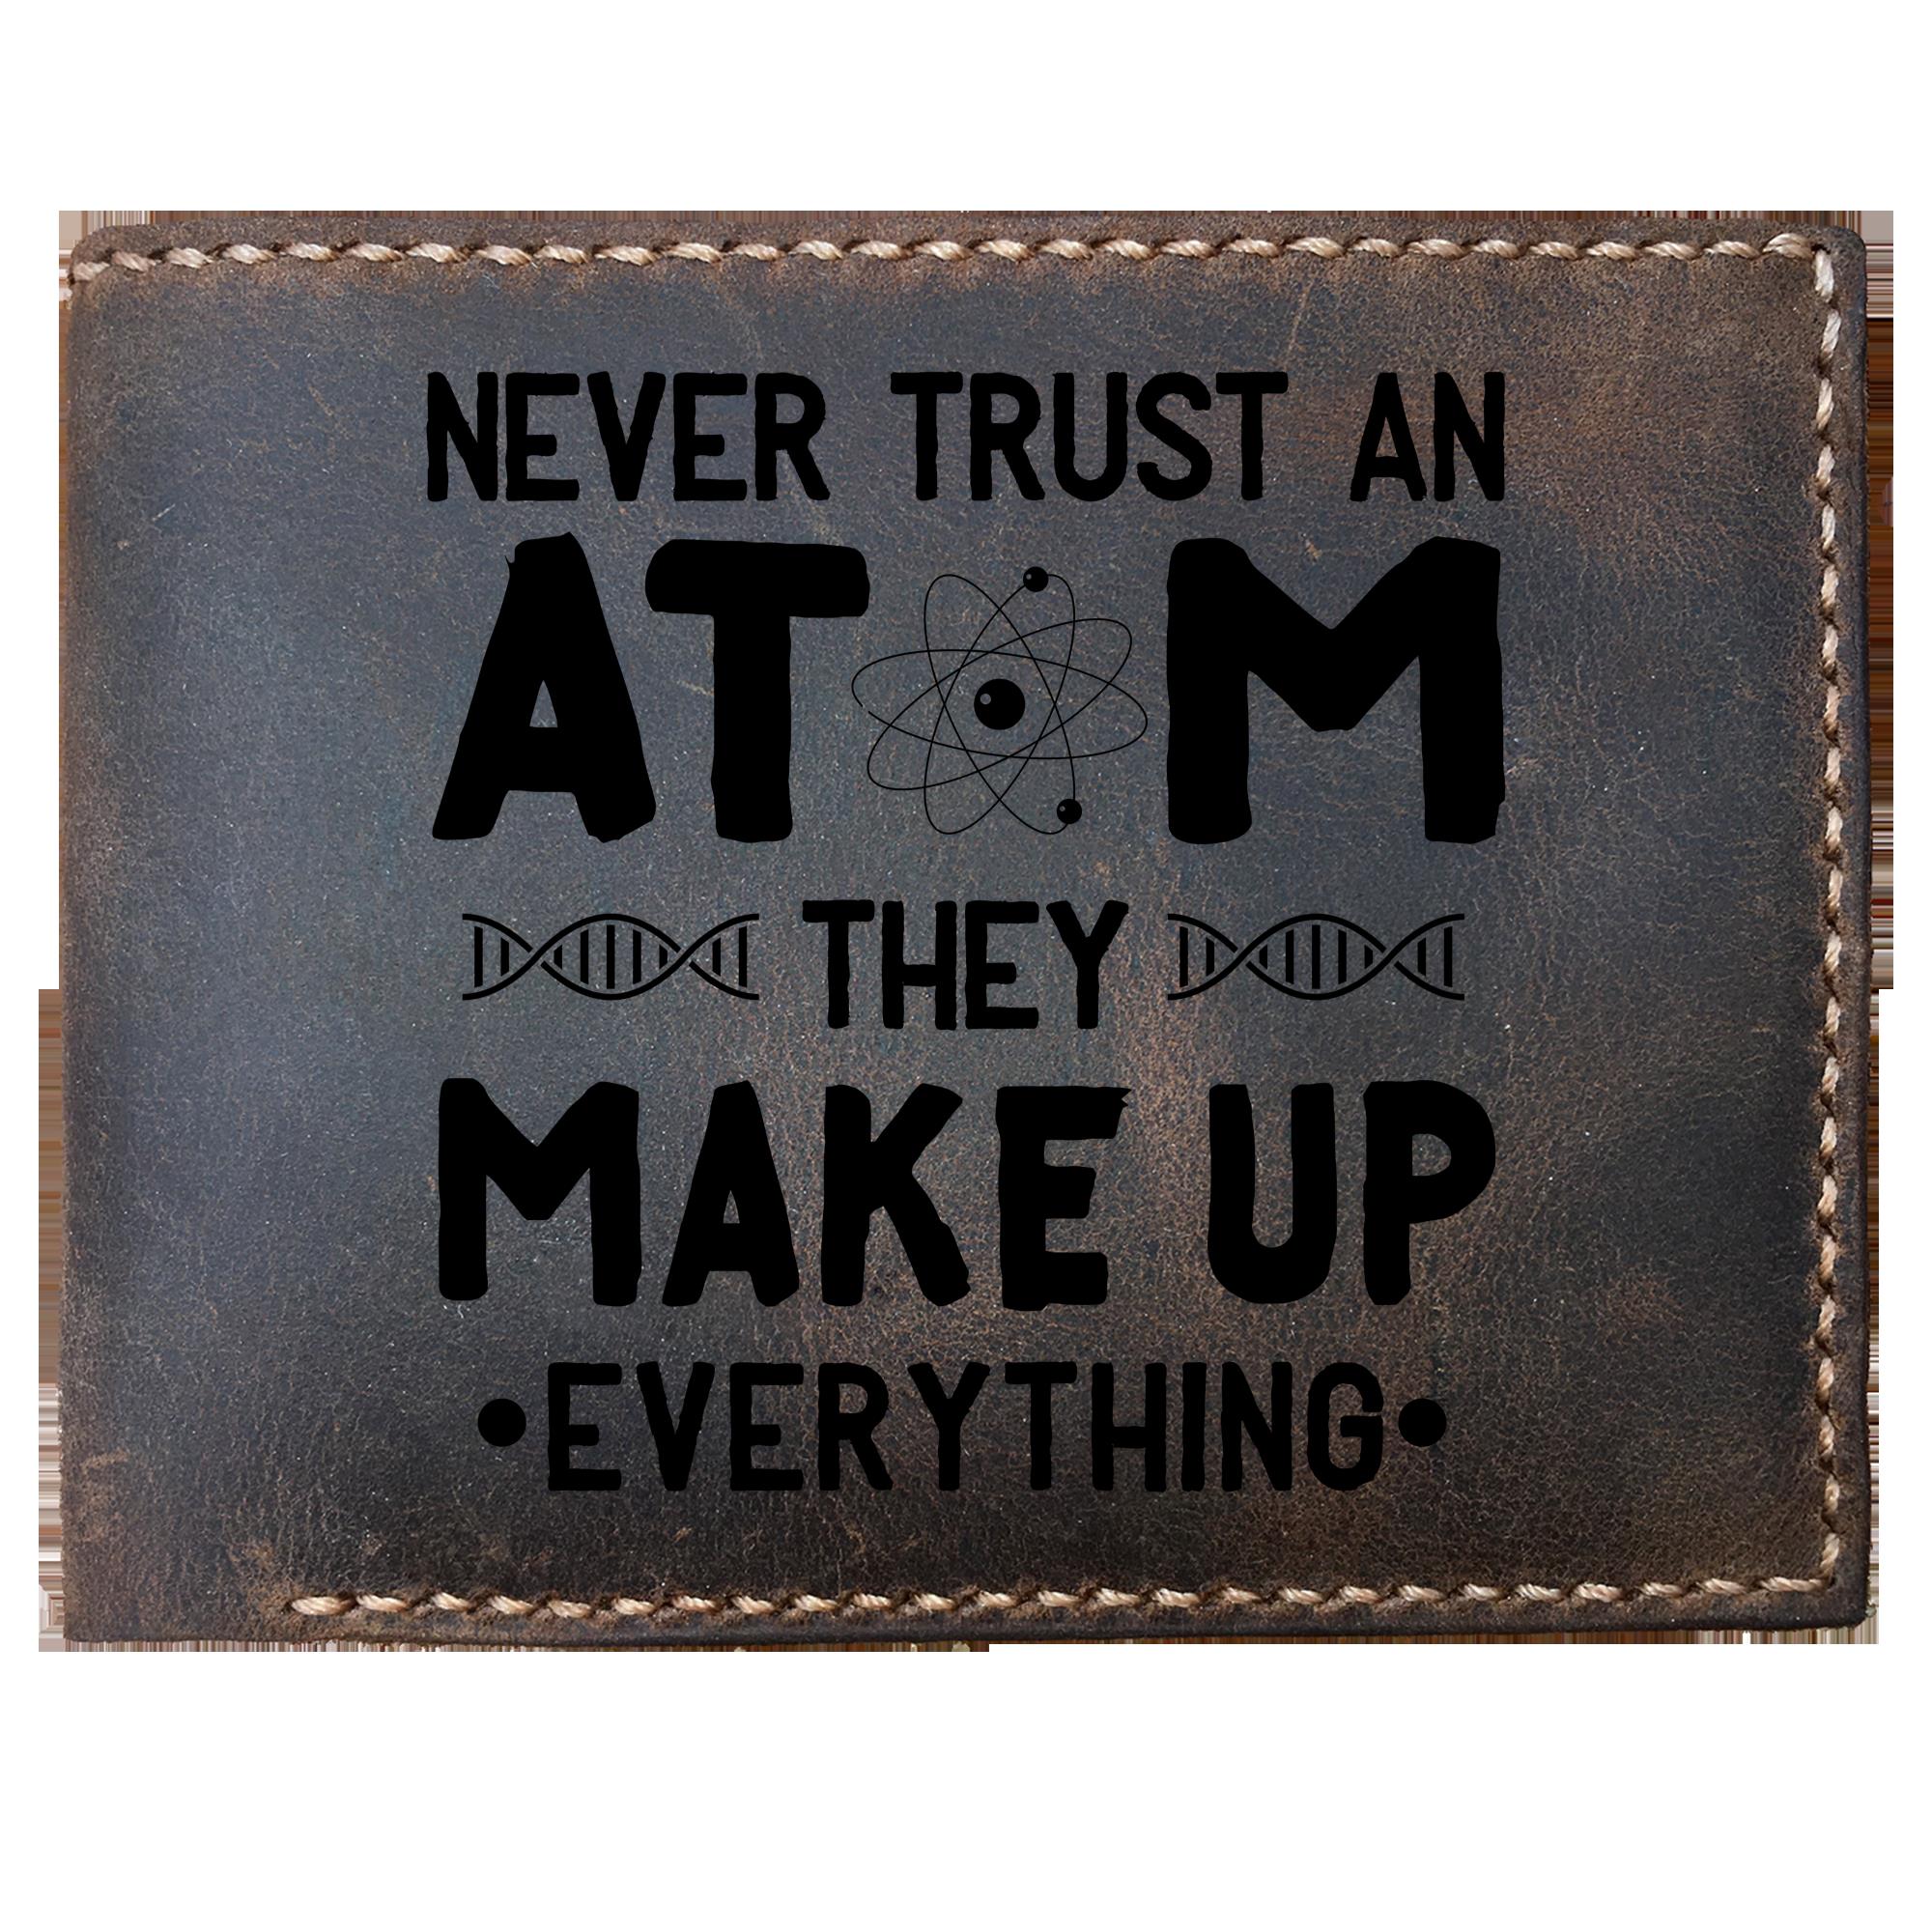 Skitongifts Funny Custom Laser Engraved Bifold Leather Wallet, Never Trust An Atom They Make Up Everything Science, Chemisty, Physicist